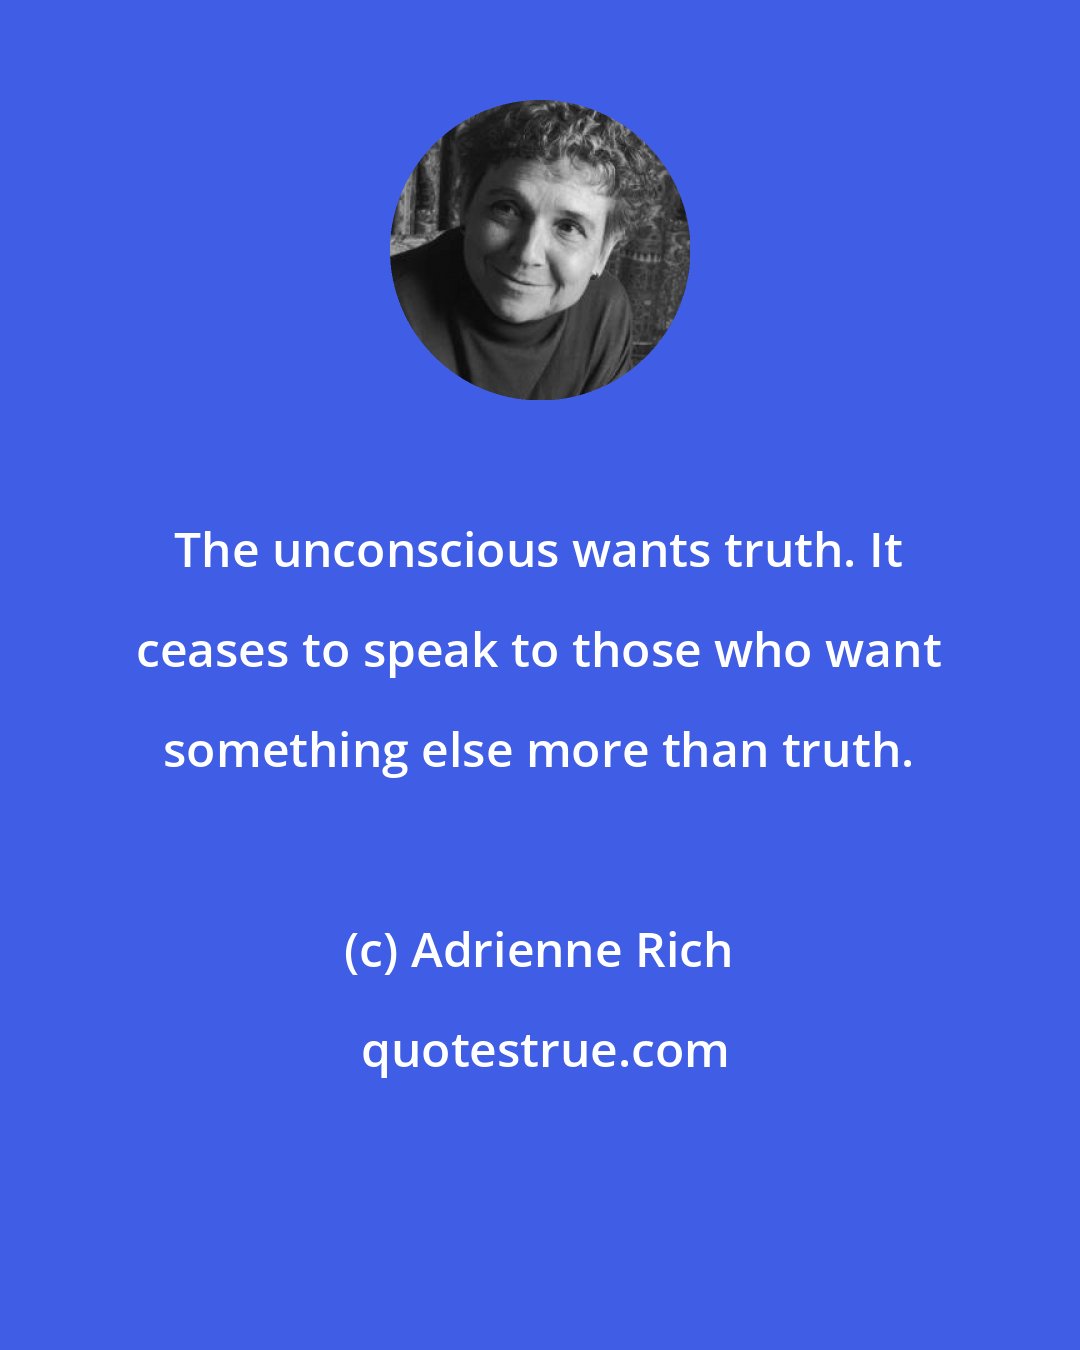 Adrienne Rich: The unconscious wants truth. It ceases to speak to those who want something else more than truth.